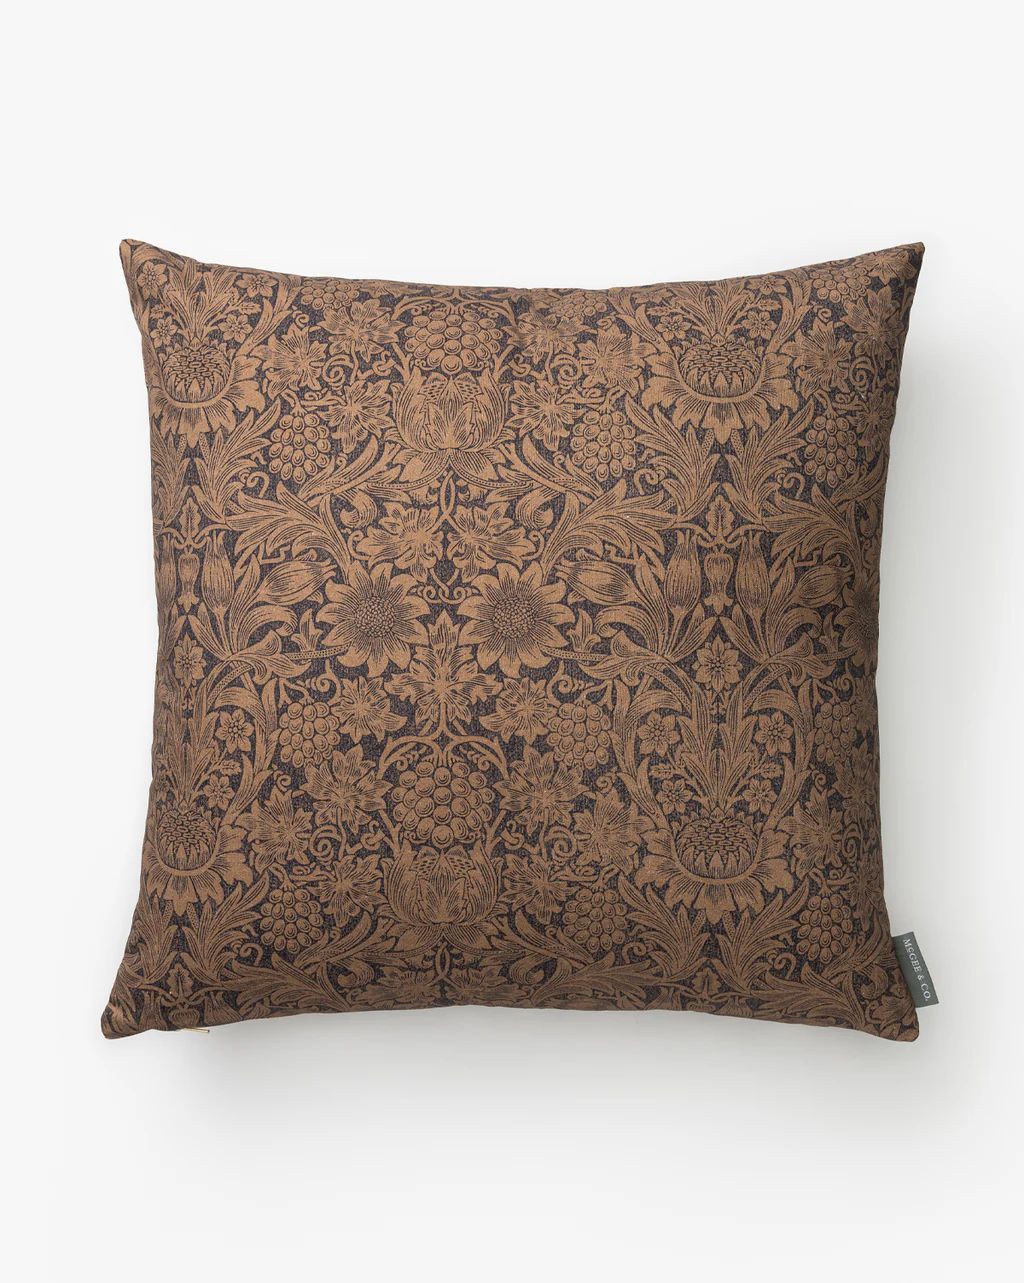 Morris & Co. x McGee & Co. Sunflower Pillow Cover | McGee & Co. (US)